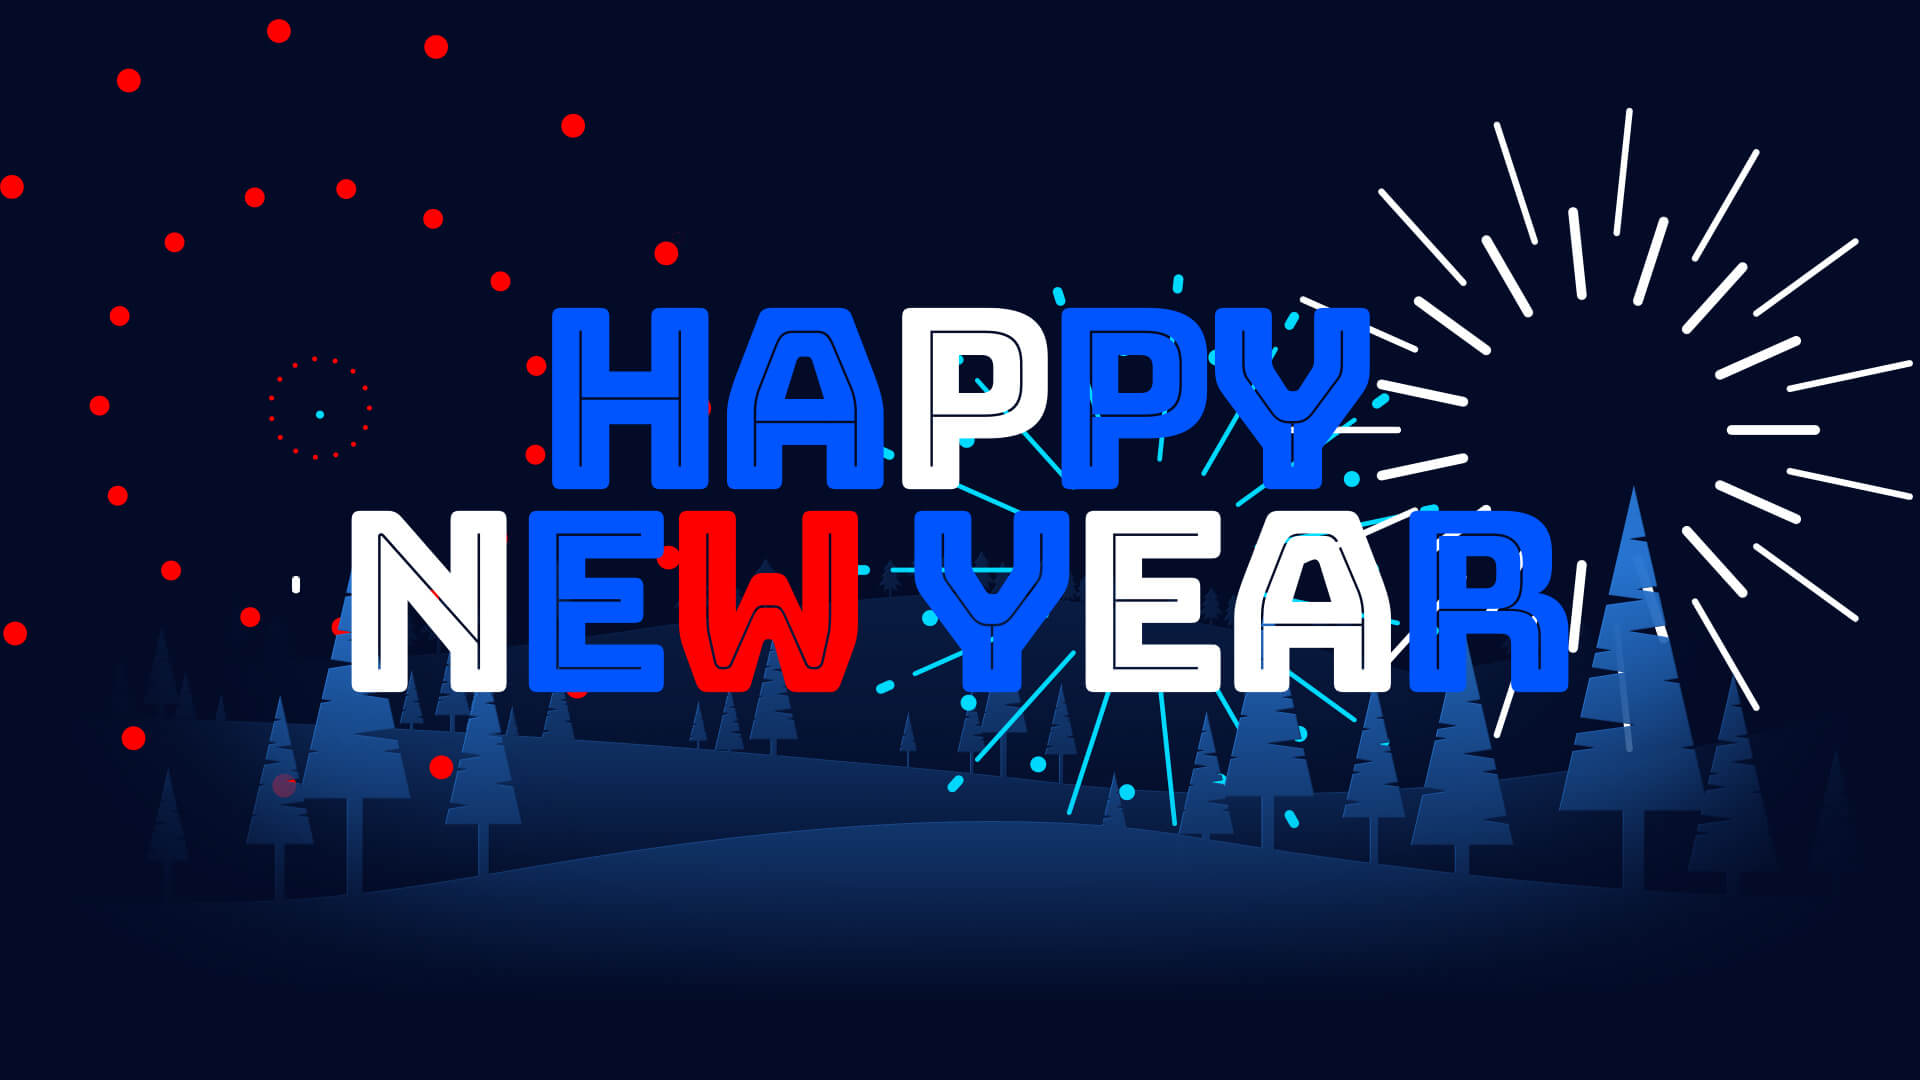 Happy New Year 2021 Animated Fireworks Title Animations happy new year 2021 animated fireworks